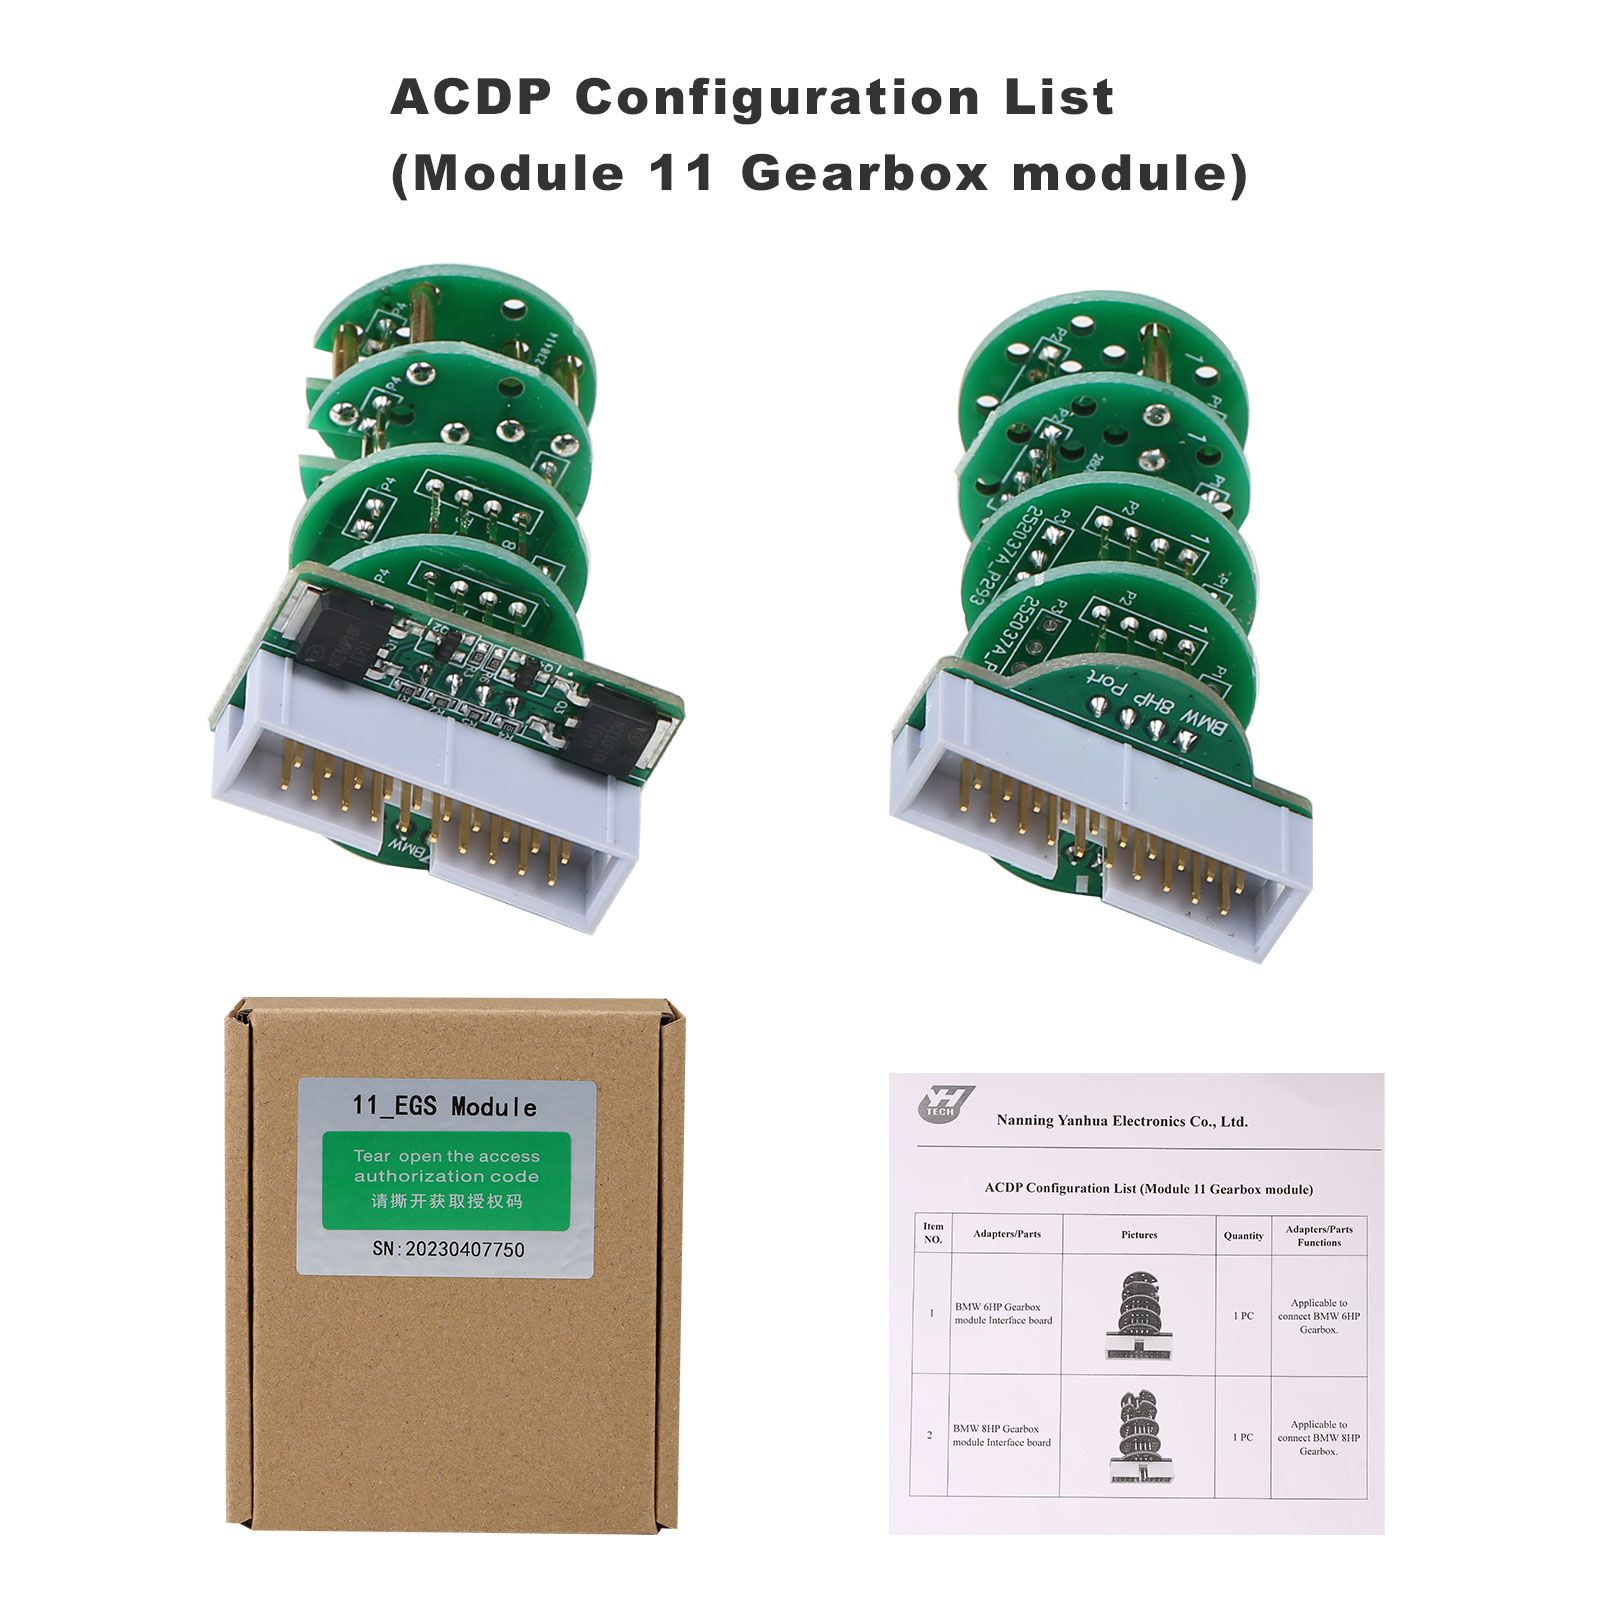 Yanhua Mini ACDP Programming Master BMW Full Package with Module1/2/3/4/7/8/11 Total 7 Authorizations